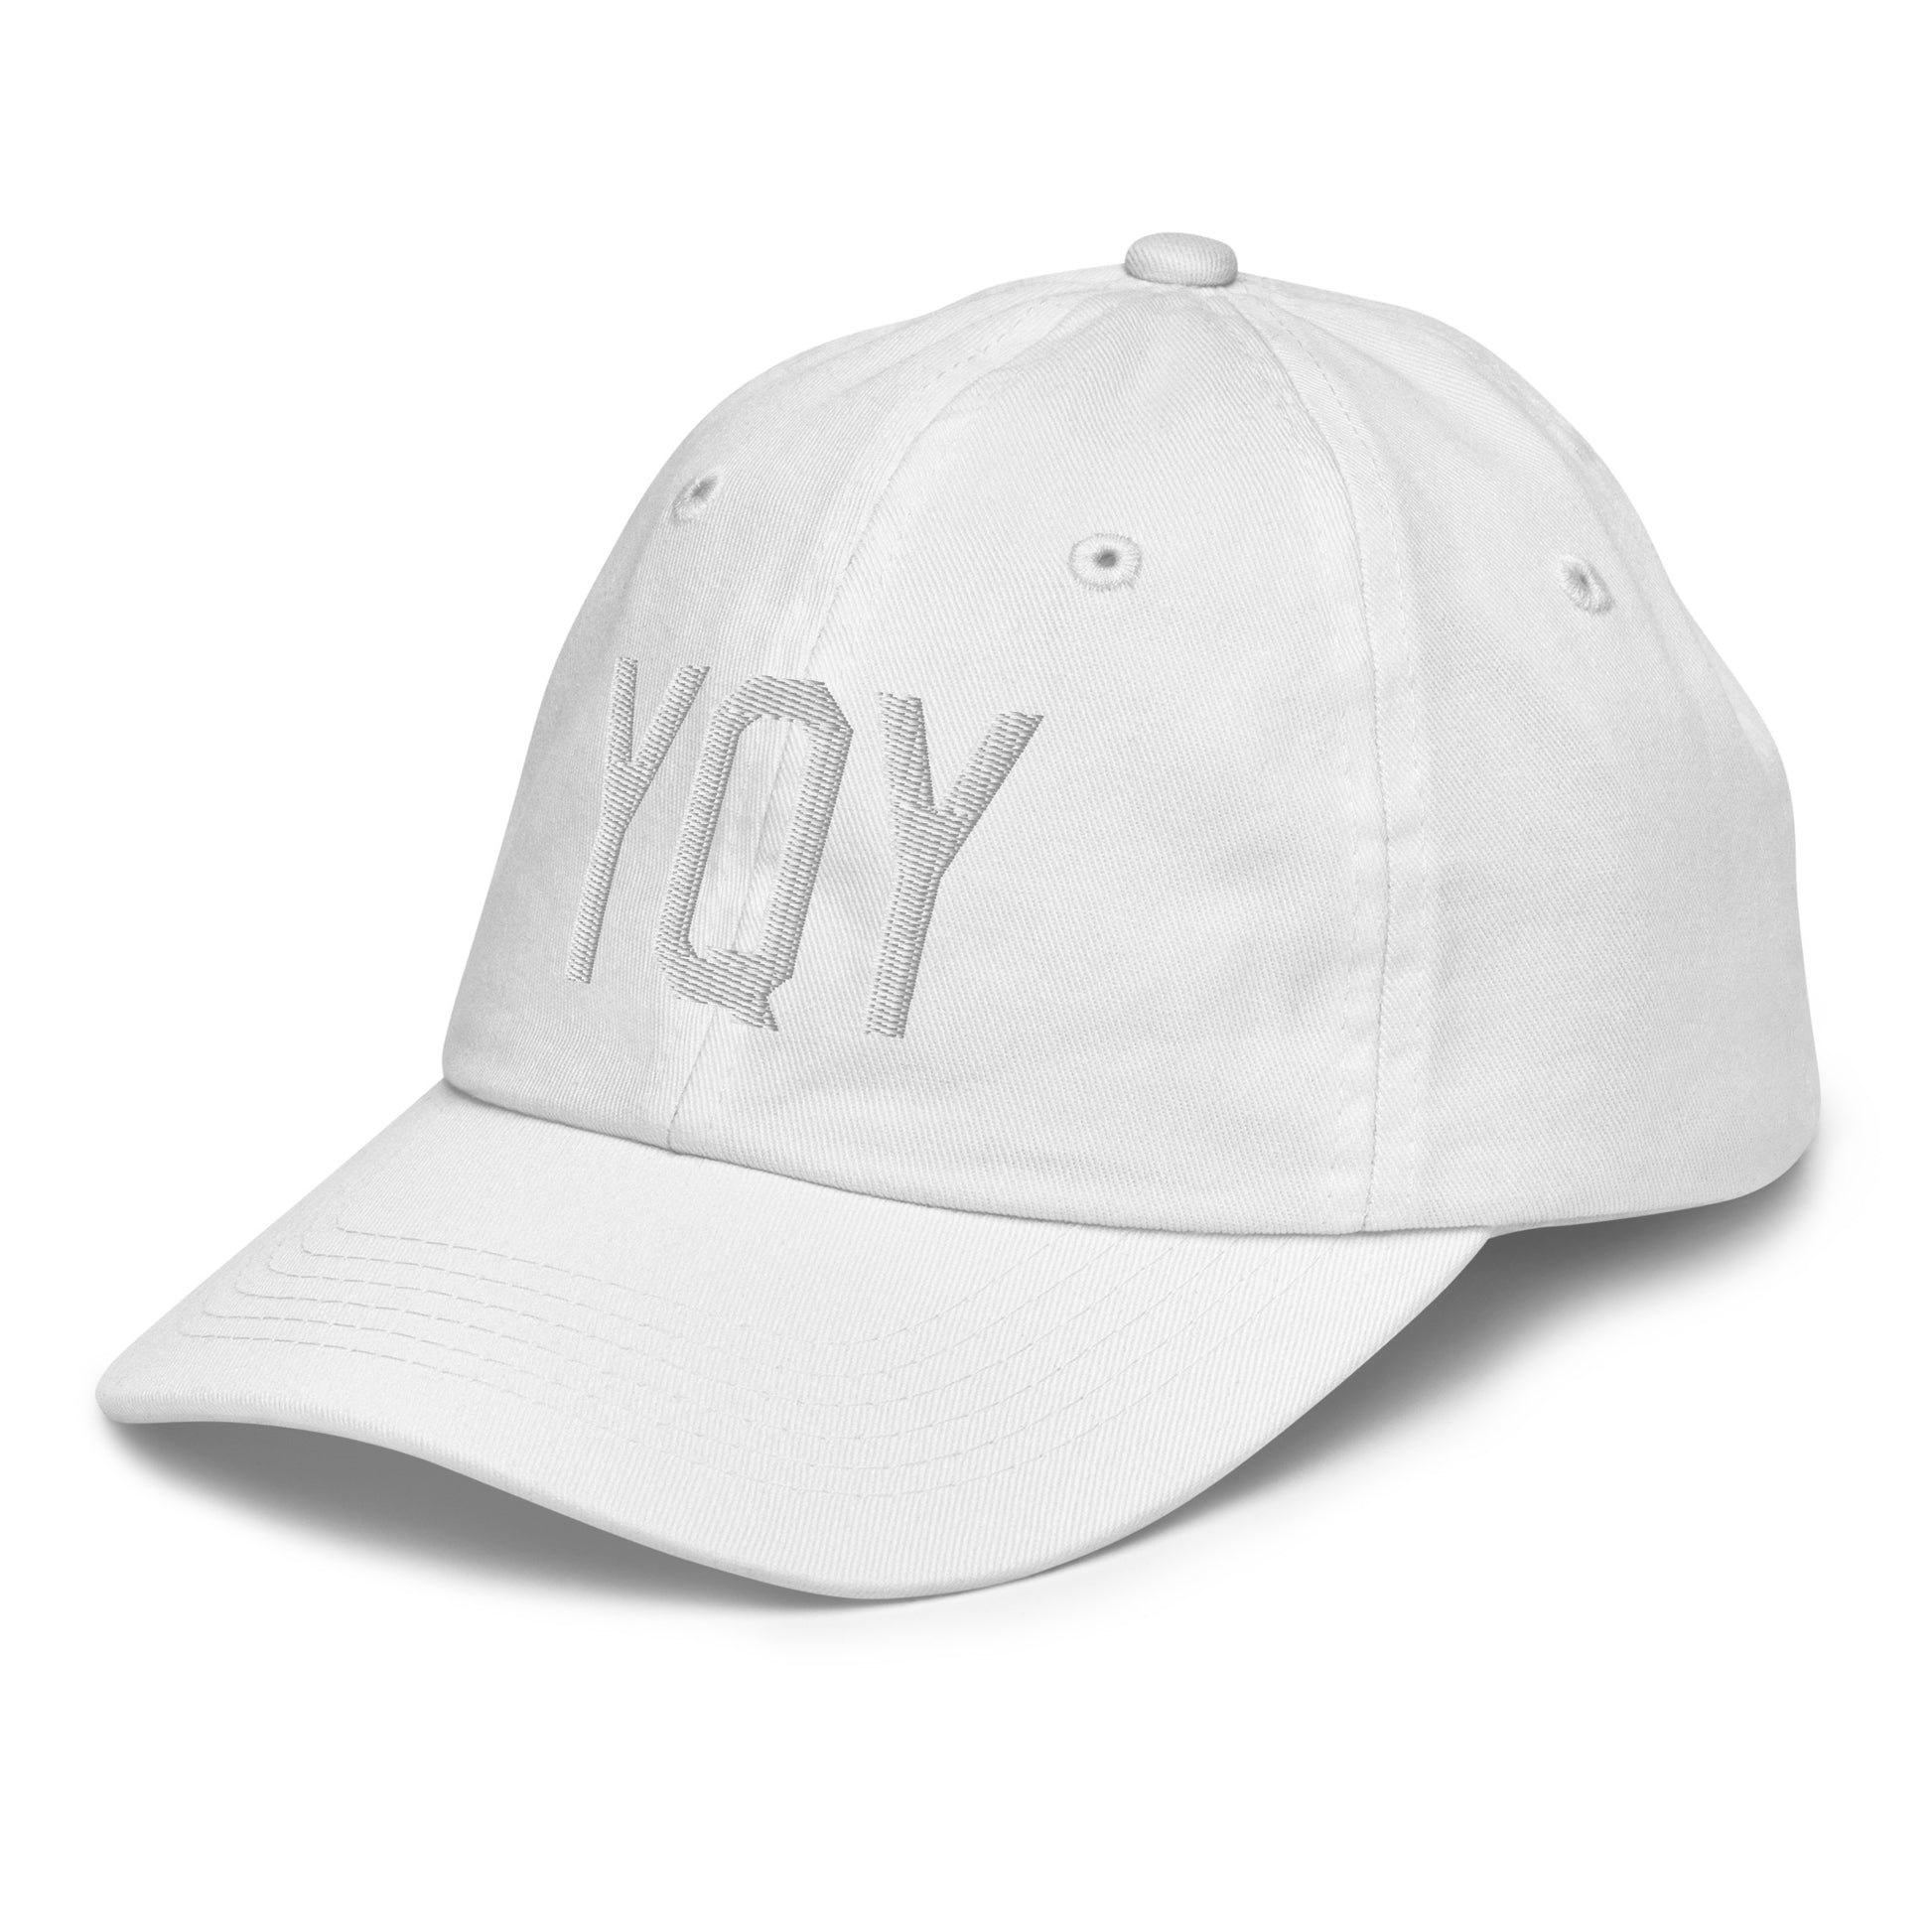 Airport Code Kid's Baseball Cap - White • YQY Sydney • YHM Designs - Image 36